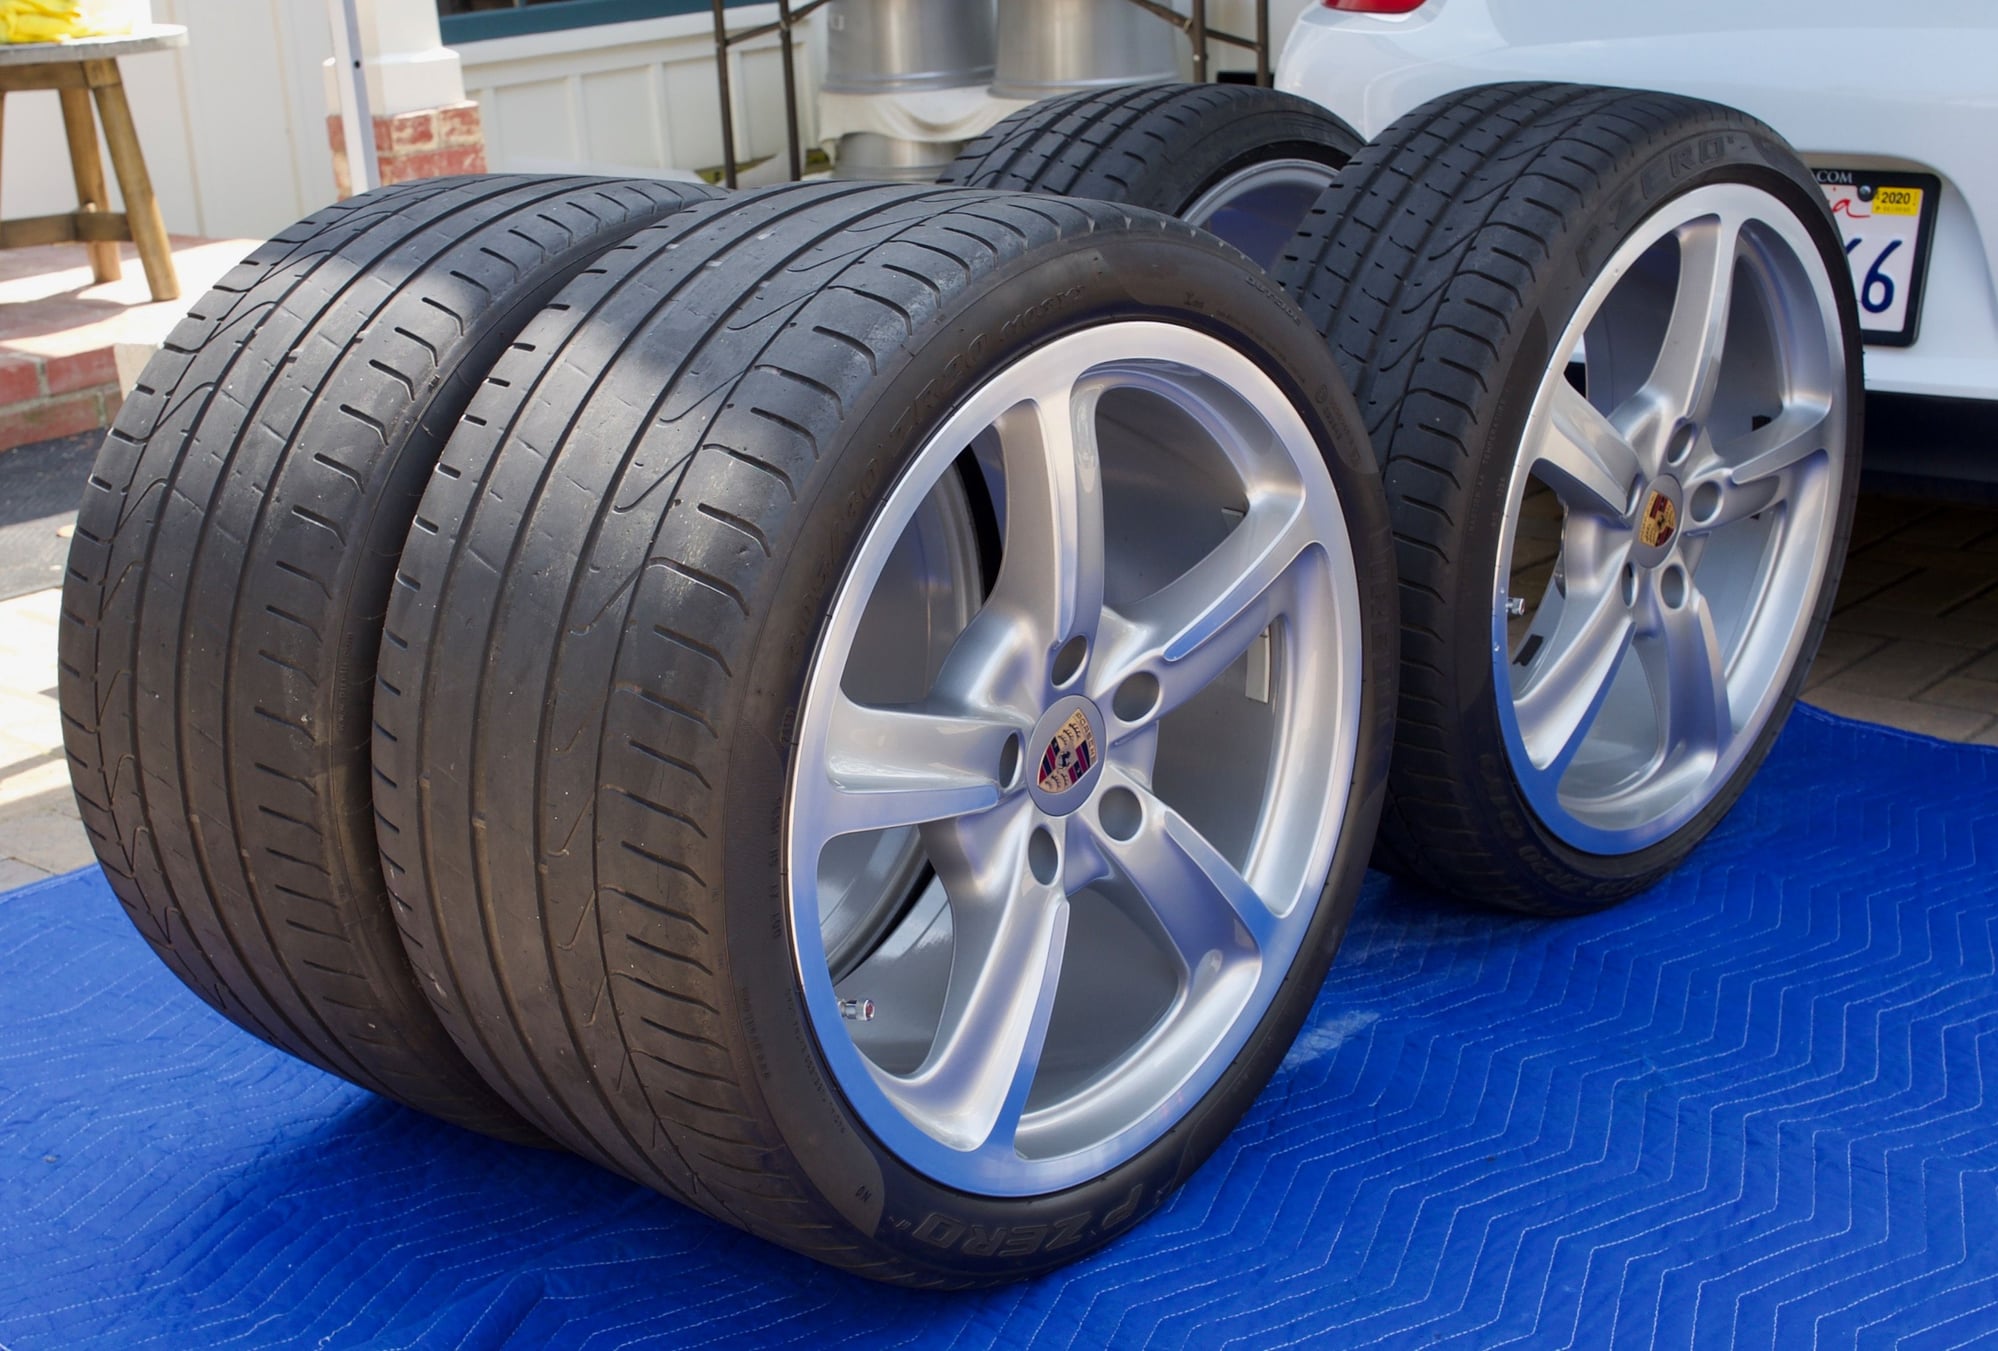 Wheels and Tires/Axles - Sport Techno Wheels 20" for 991 includes tires, center caps and valve stem caps! - Used - 2012 to 2016 Porsche 911 - Santa Barbara, CA 93108, United States